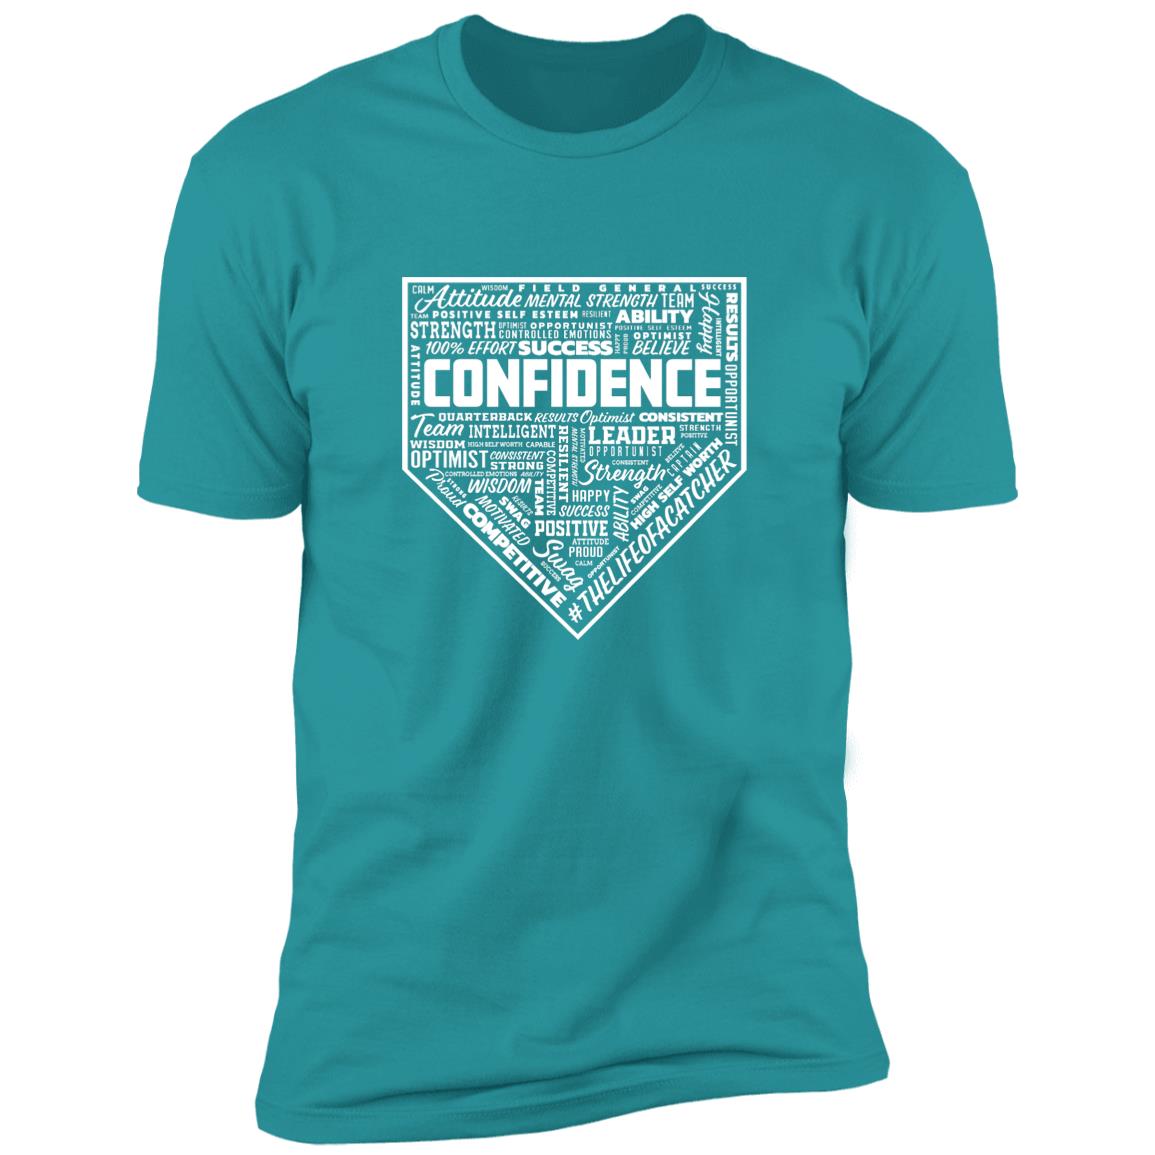 the catching guy confidence t-shirt mockup in teal